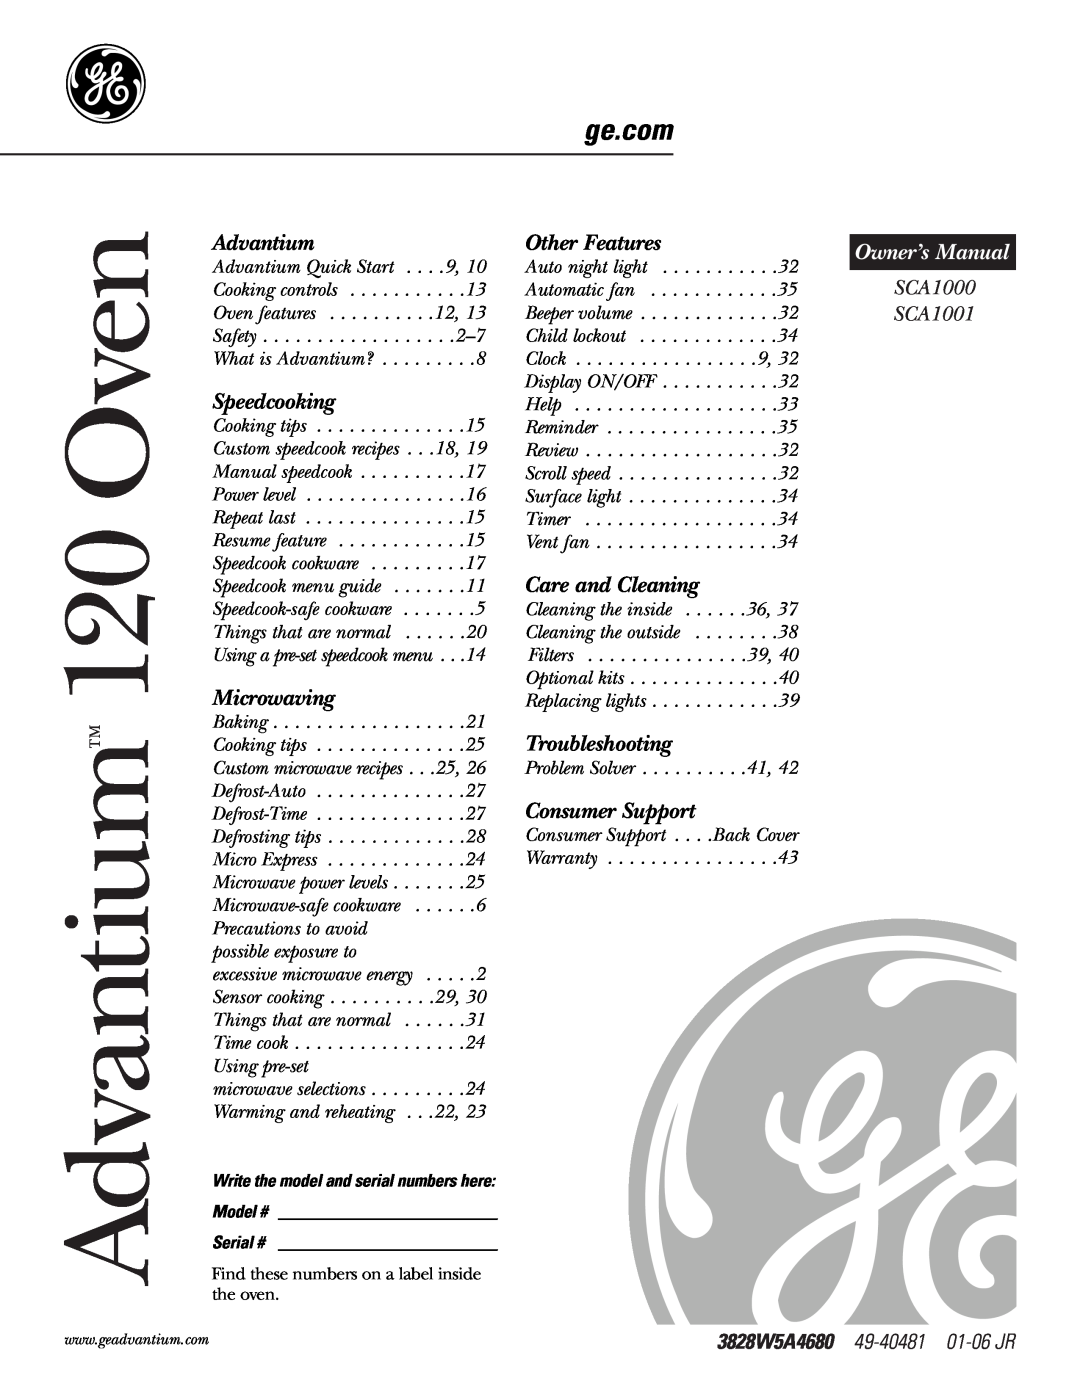 GE SCA1001 owner manual Advantium, Speedcooking, Microwaving, Other Features, Care and Cleaning, Troubleshooting, ge.com 